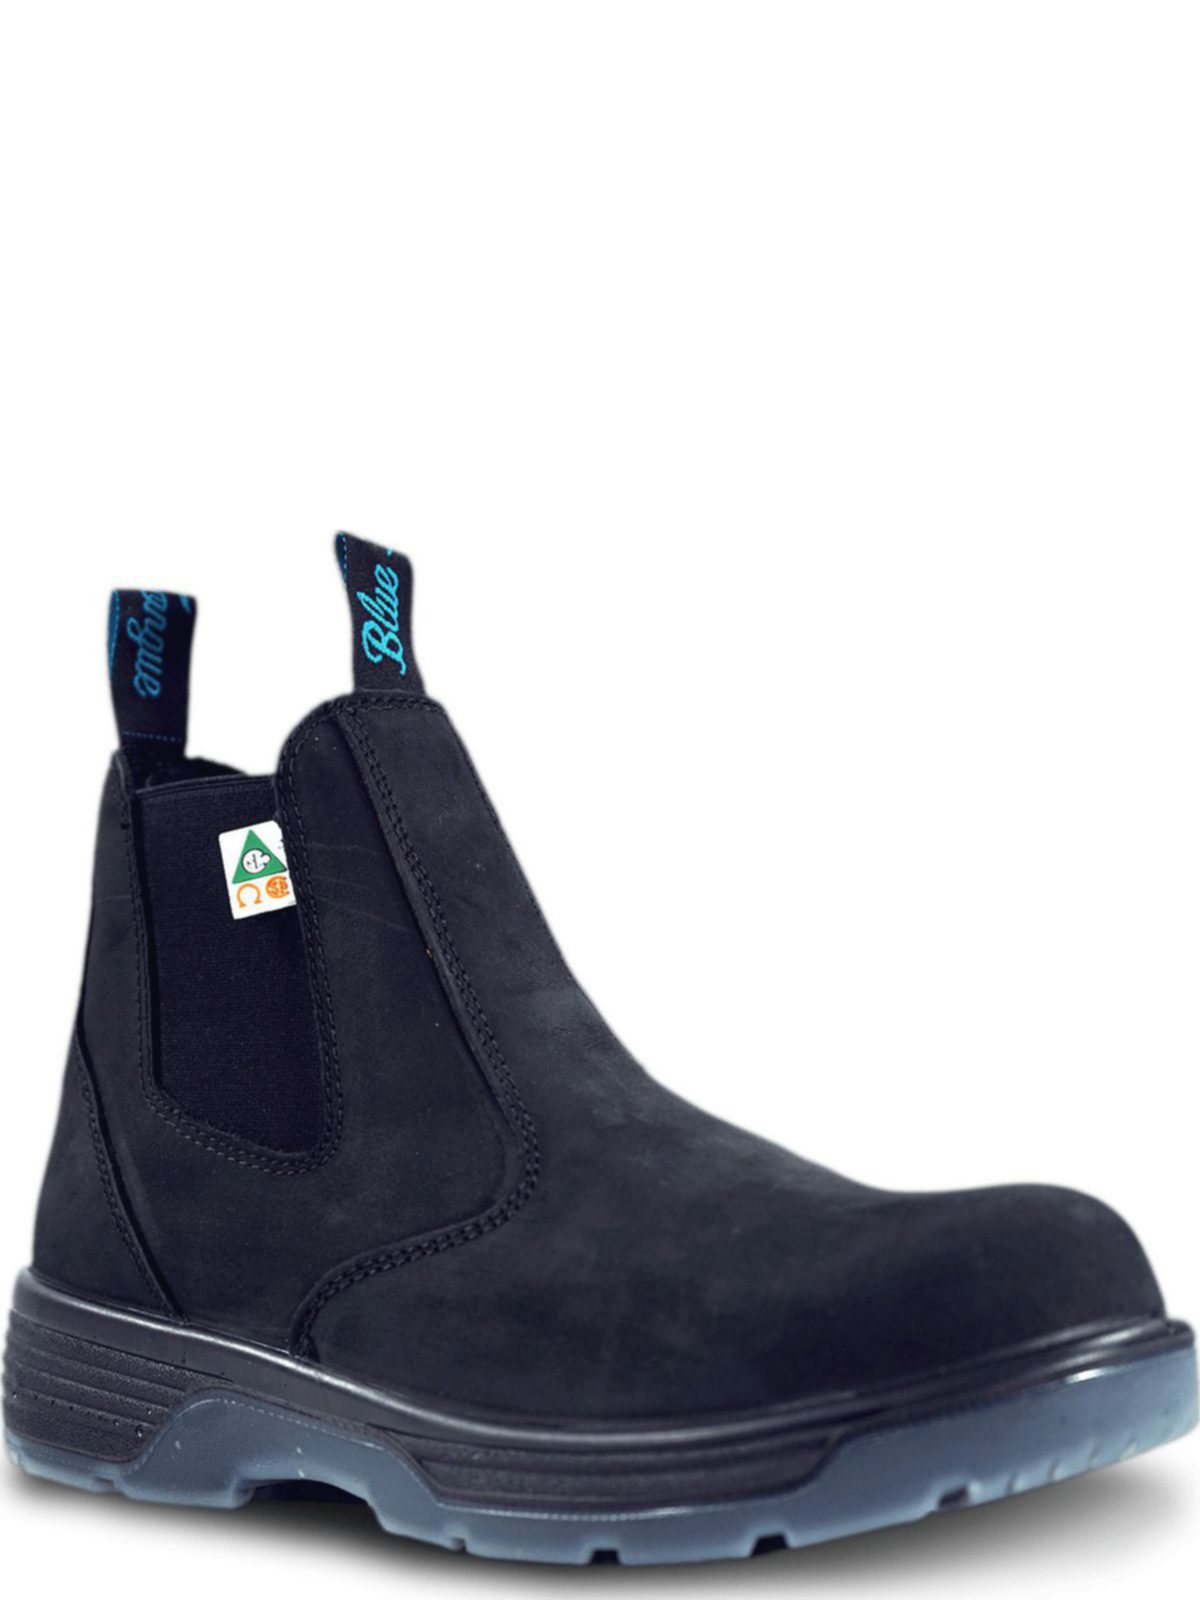 composite toe boots slip on